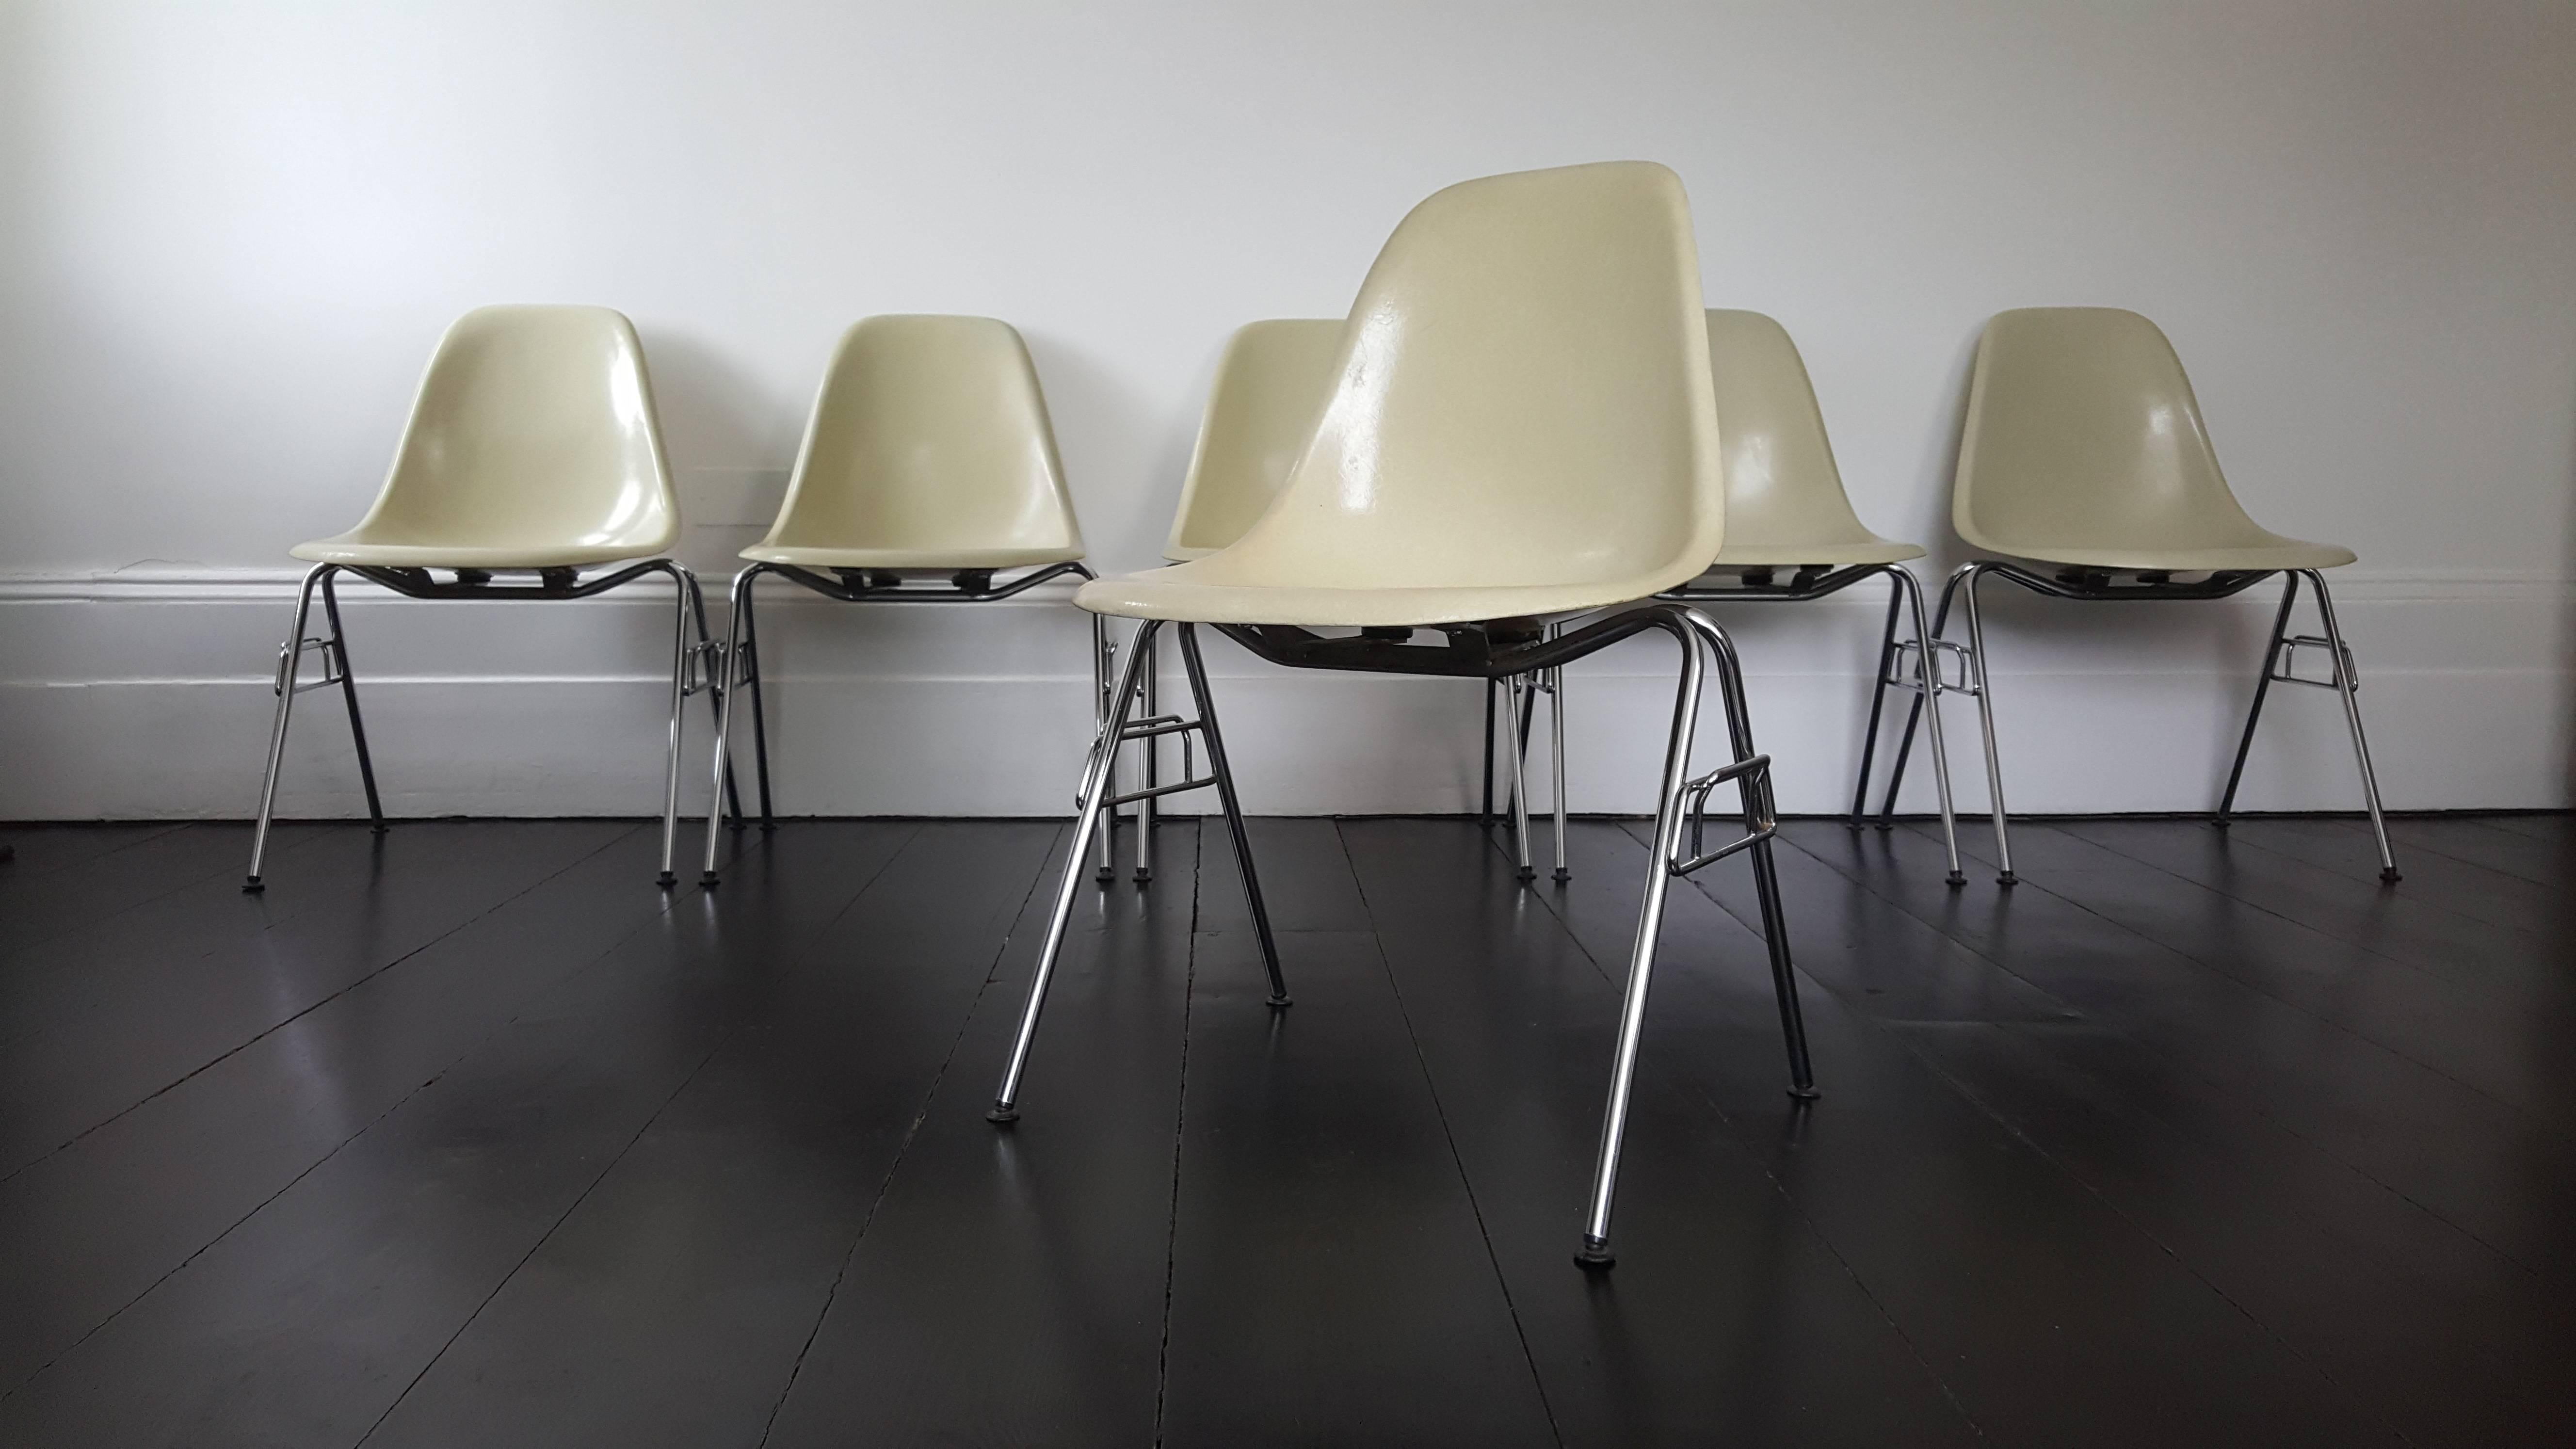 Parchment colored fibreglass Charles and Ray Eames designed Herman Miller DSS stacking chair on chromed steel bases for Herman Miller. 

Condition: Generally good, some wear but all commensurate, very light corrosion in areas on bases, some